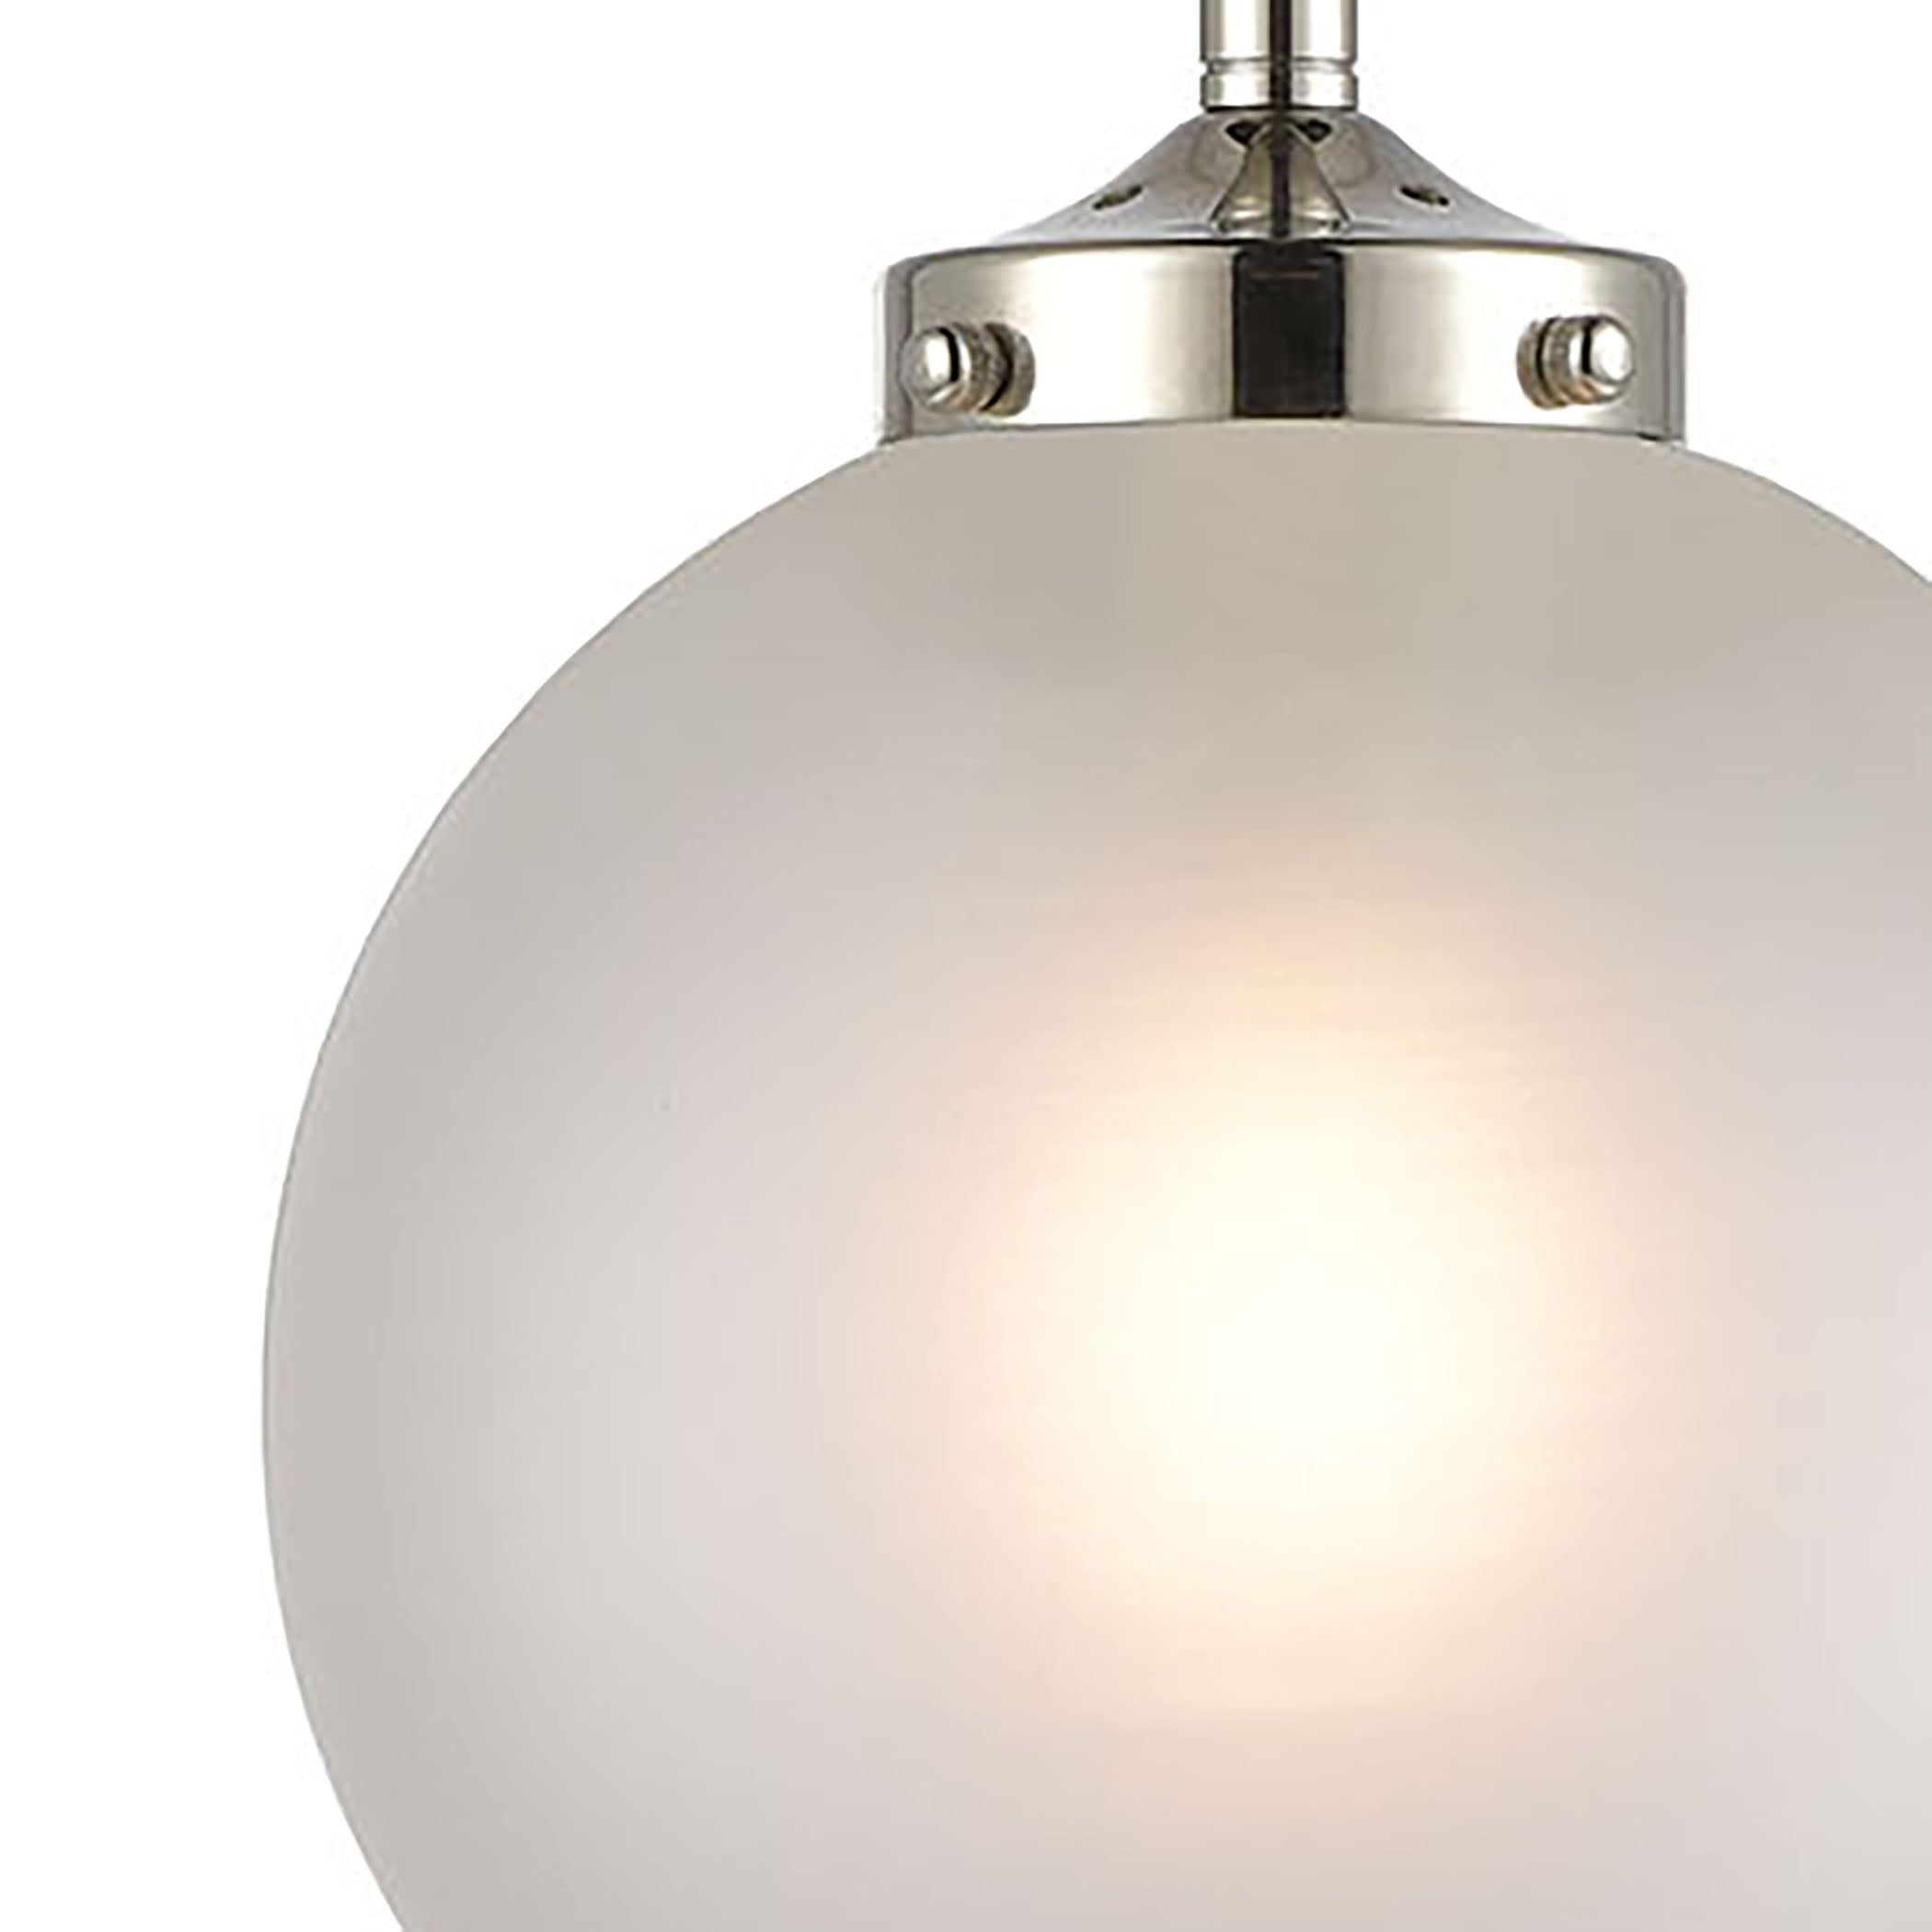 ELK Lighting 15364/1 Boudreaux 1-Light Mini Pendant in Polished Nickel with Frosted